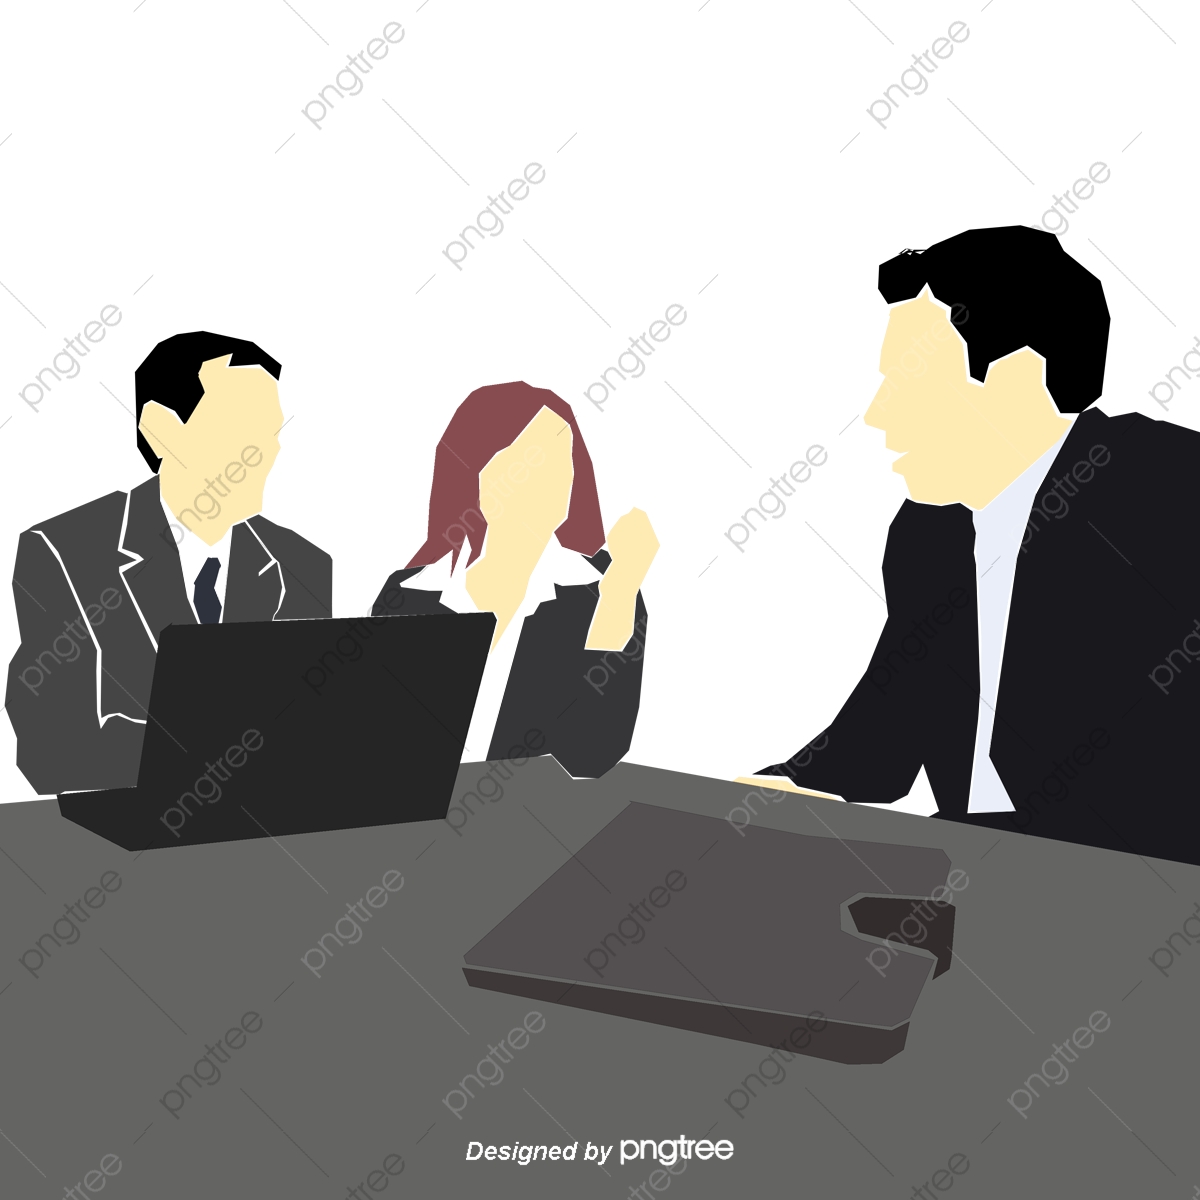 discussion clipart formal meeting